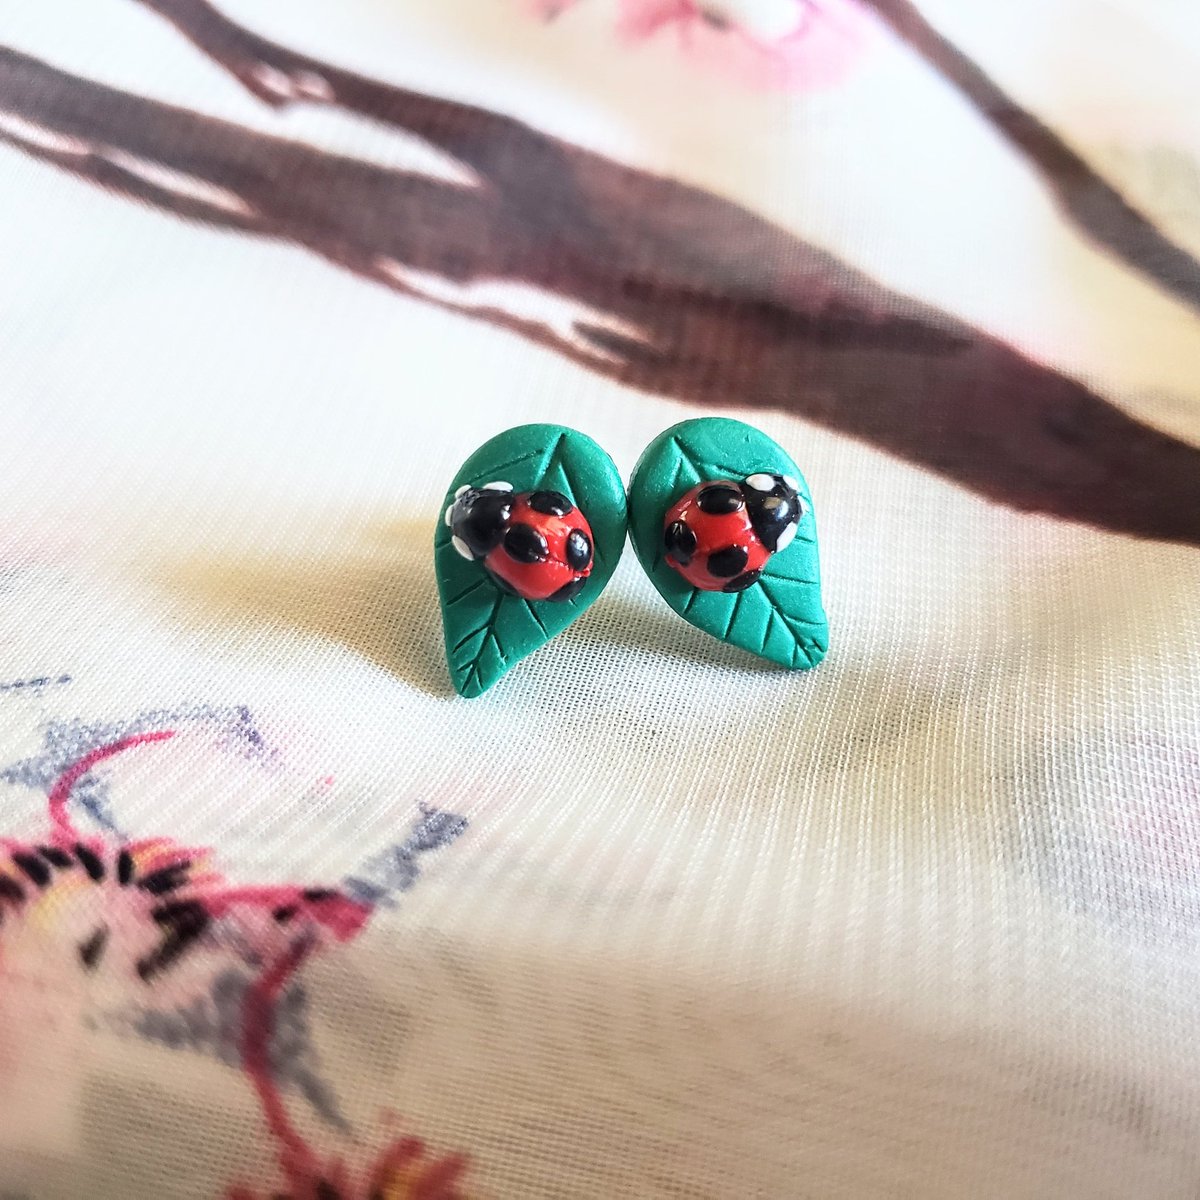 Look! A little ladybug on a leaf! These tiny leaf studs will be added to my shop tonight! #ladybug #bugjewelry #insectjewelry #leafjewelry #leafearrings #studearrings #polymerclayearrings #handmade #shopsmall pearlsandarrows.etsy.com